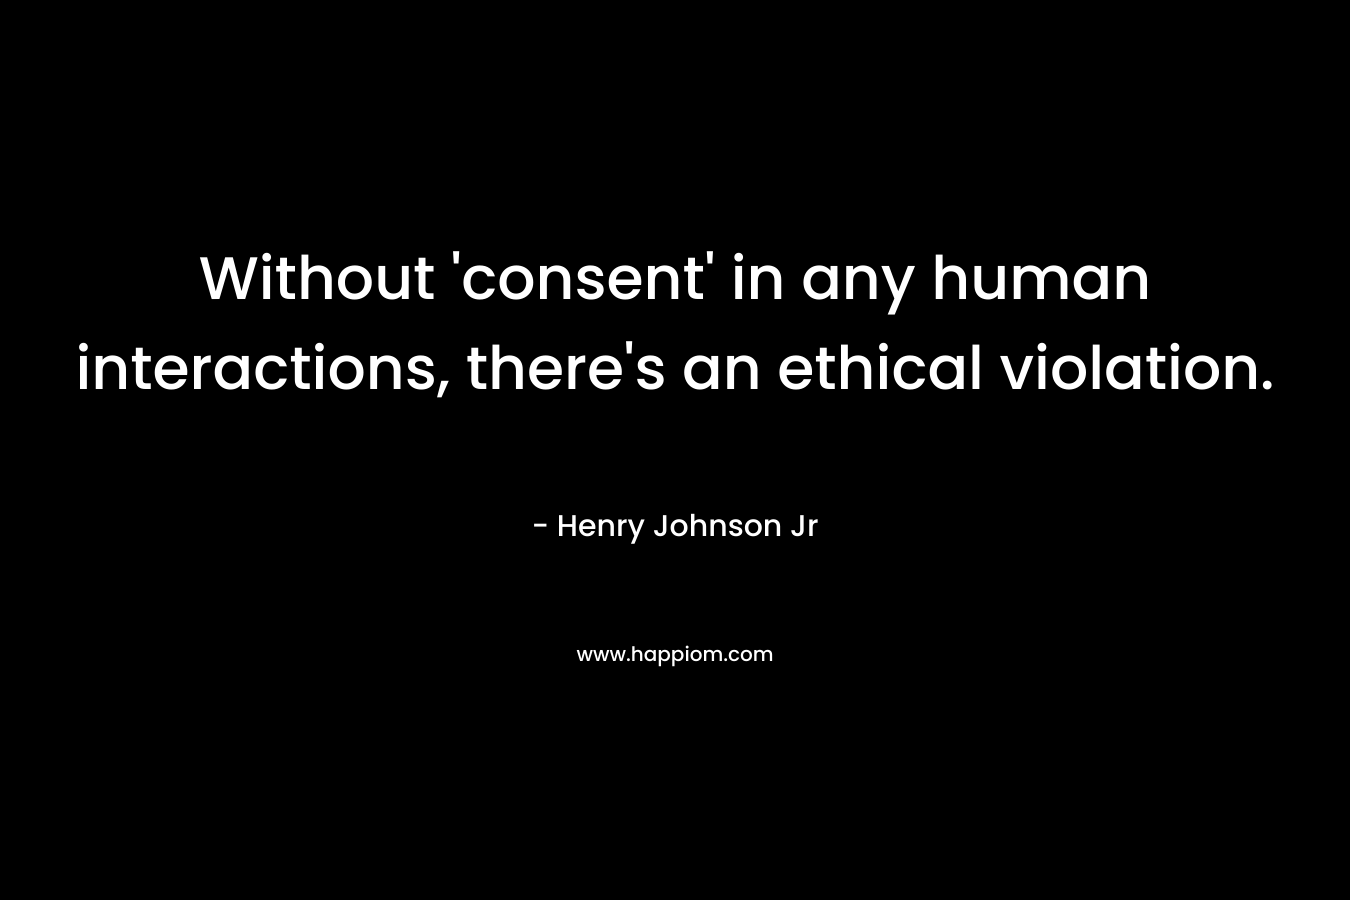 Without ‘consent’ in any human interactions, there’s an ethical violation. – Henry Johnson Jr